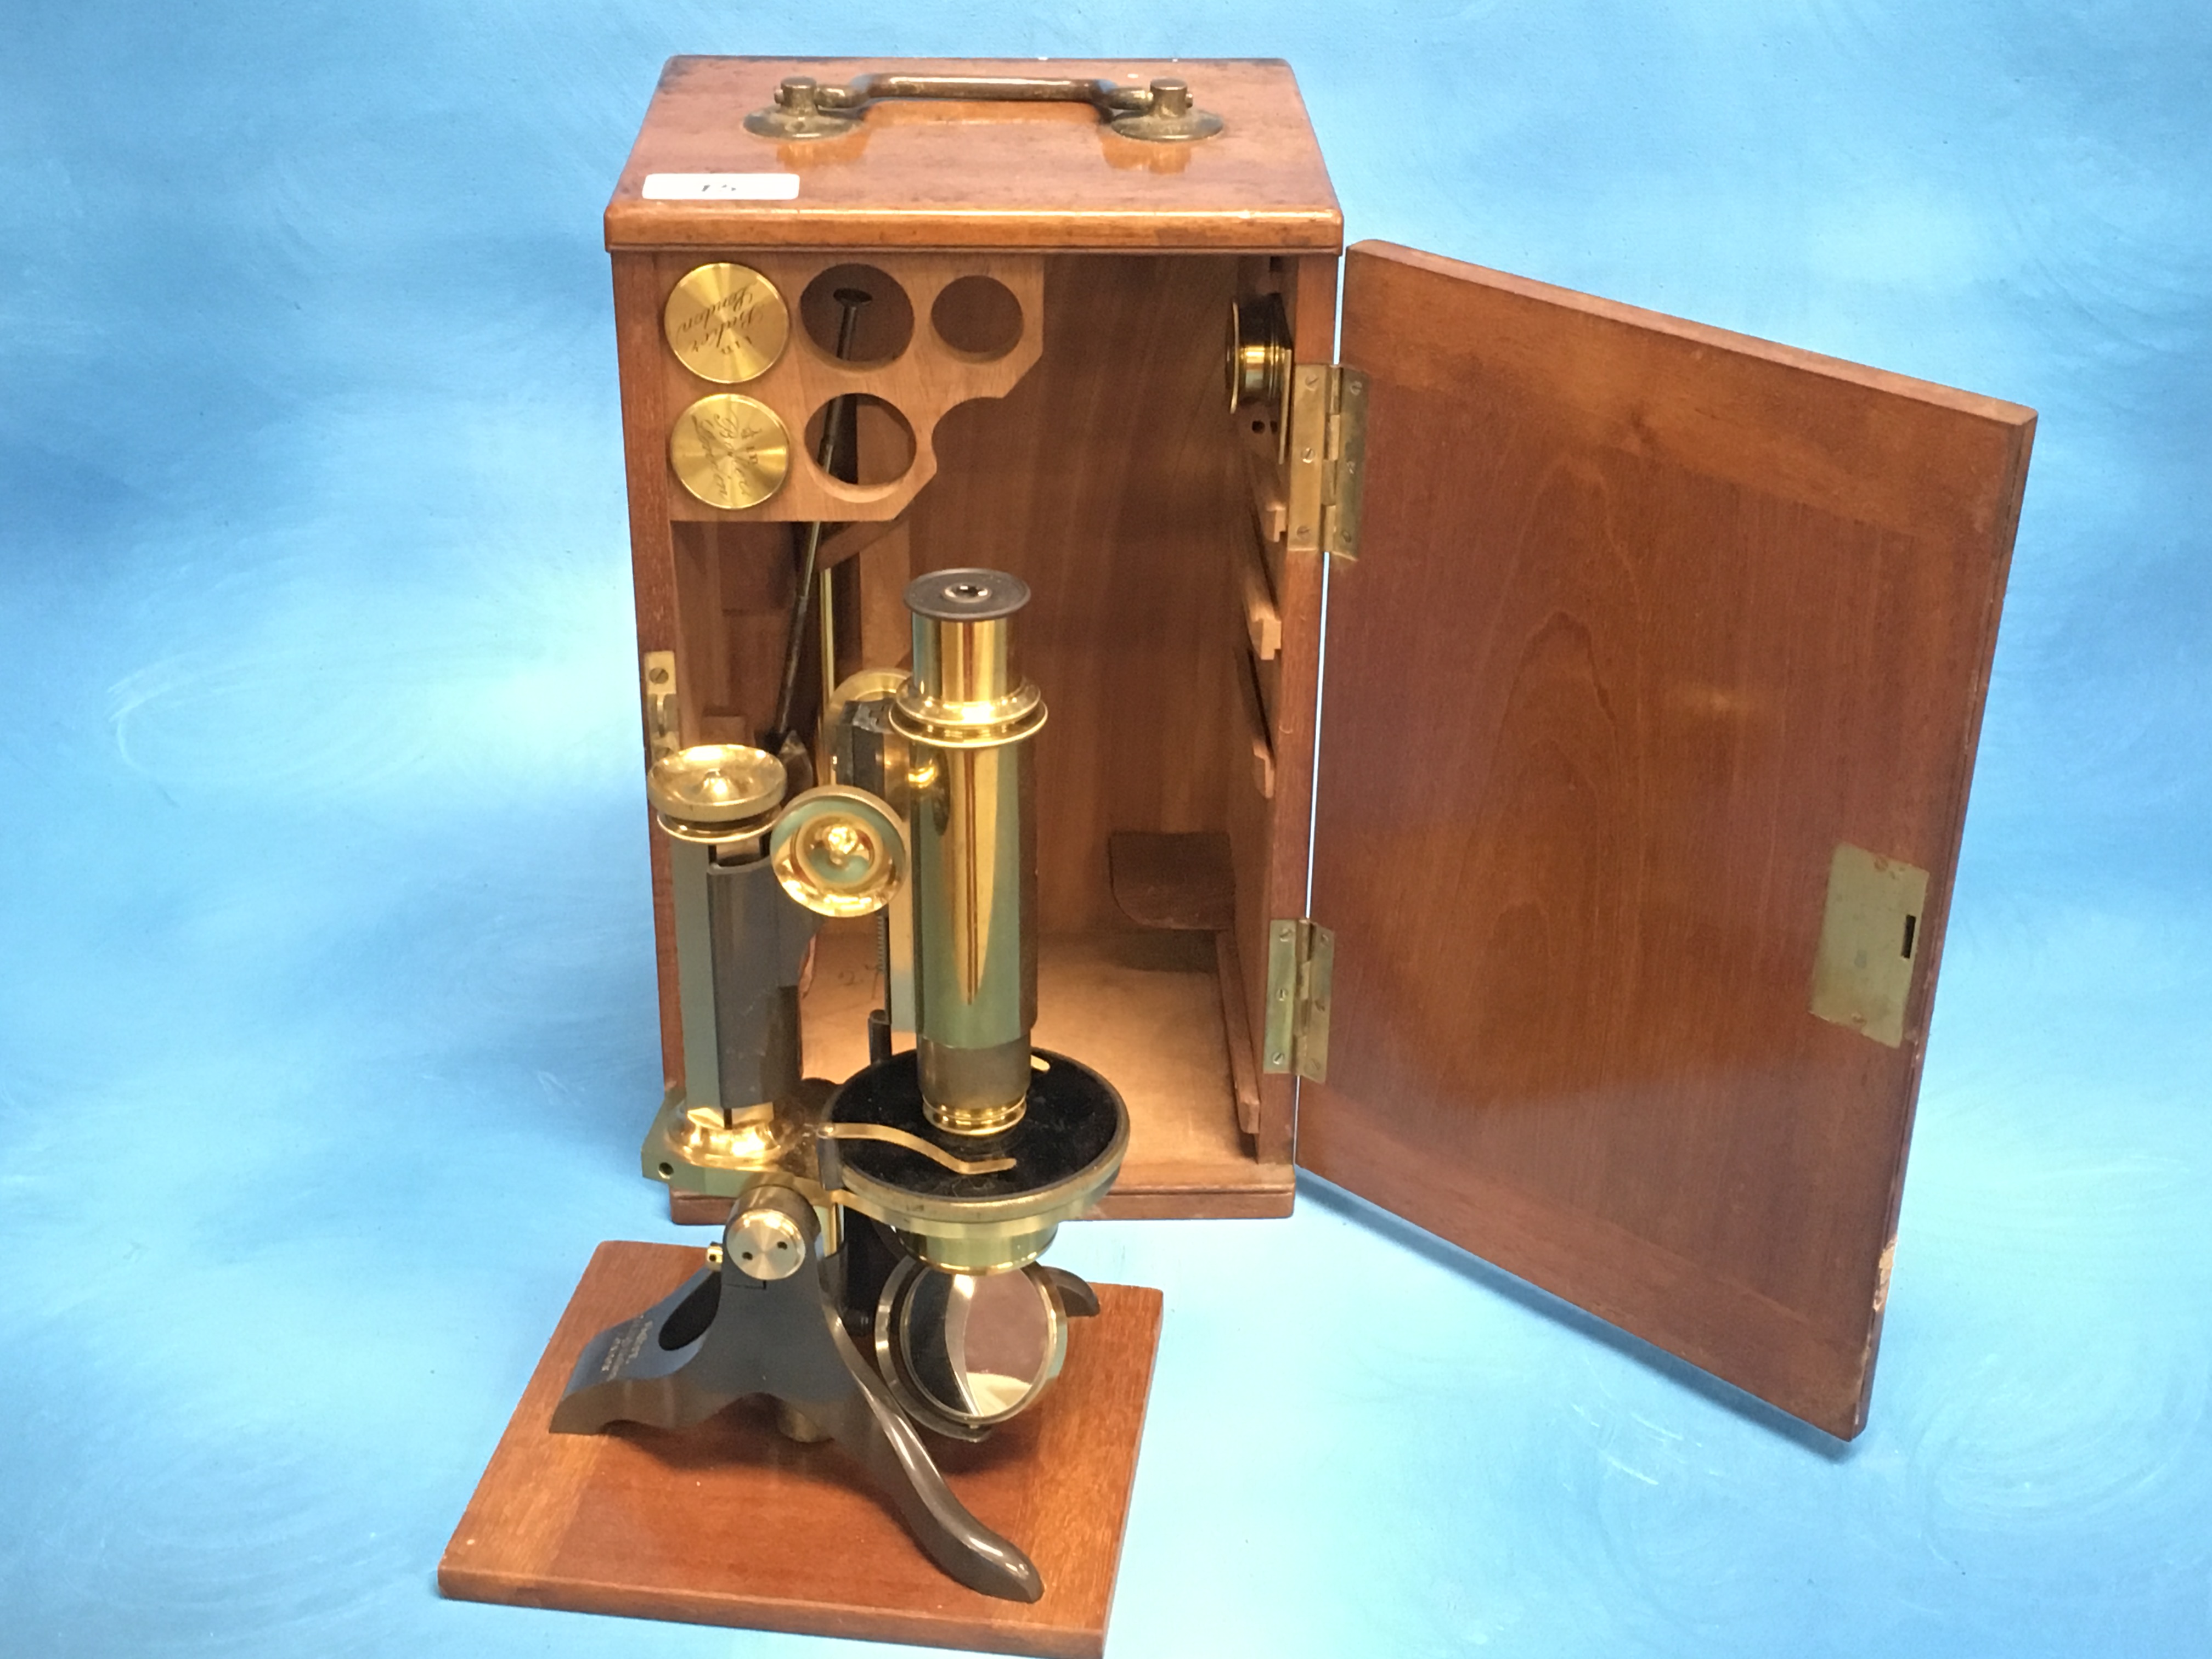 BRASS CASED MICROSCOPE WITH ACCESSORIES IN ORIGINAL FITTED MAHOGANY CASE BY BAKER LONDON - Image 2 of 2